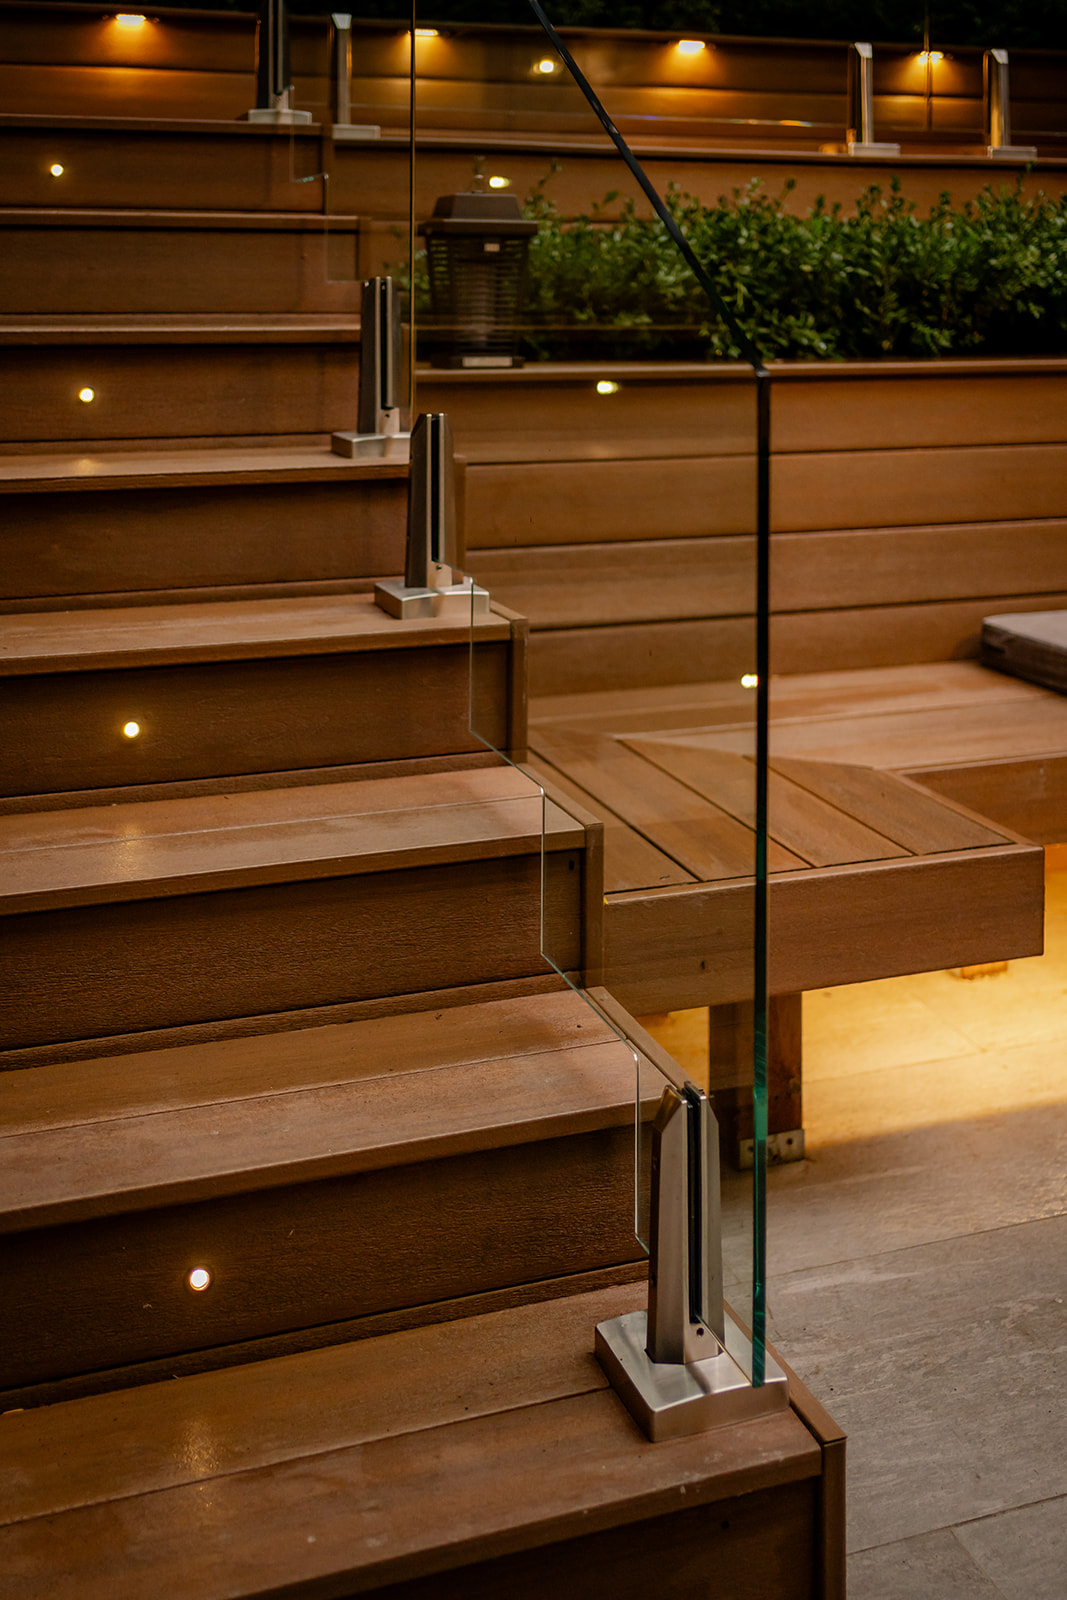 Stairs leading up with lights on every other step with glass railing.